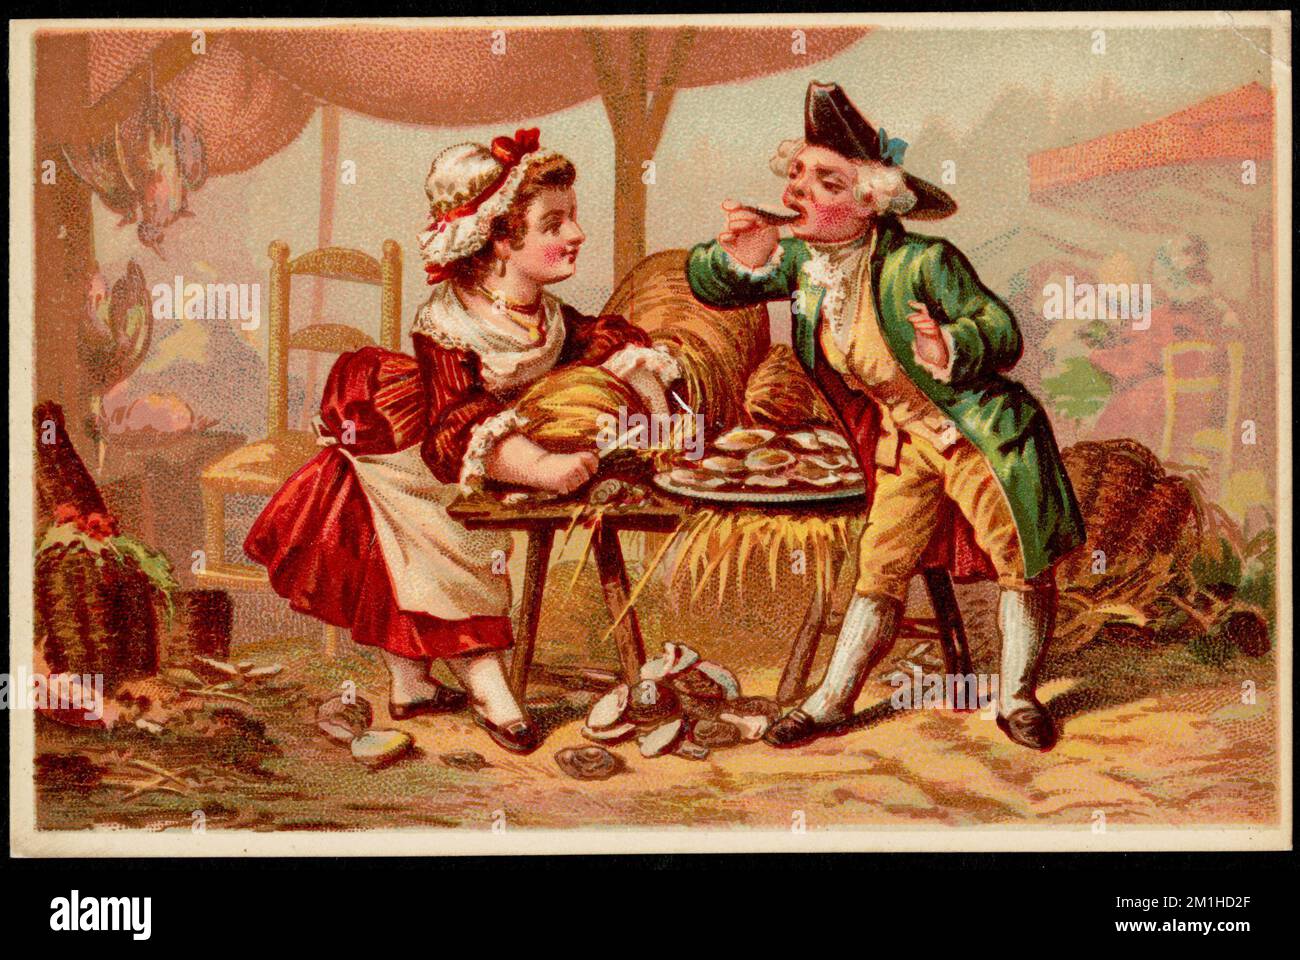 Man and woman dressed in historical costume, man eating oysters. , Adults, Oysters, 19th Century American Trade Cards Stock Photo